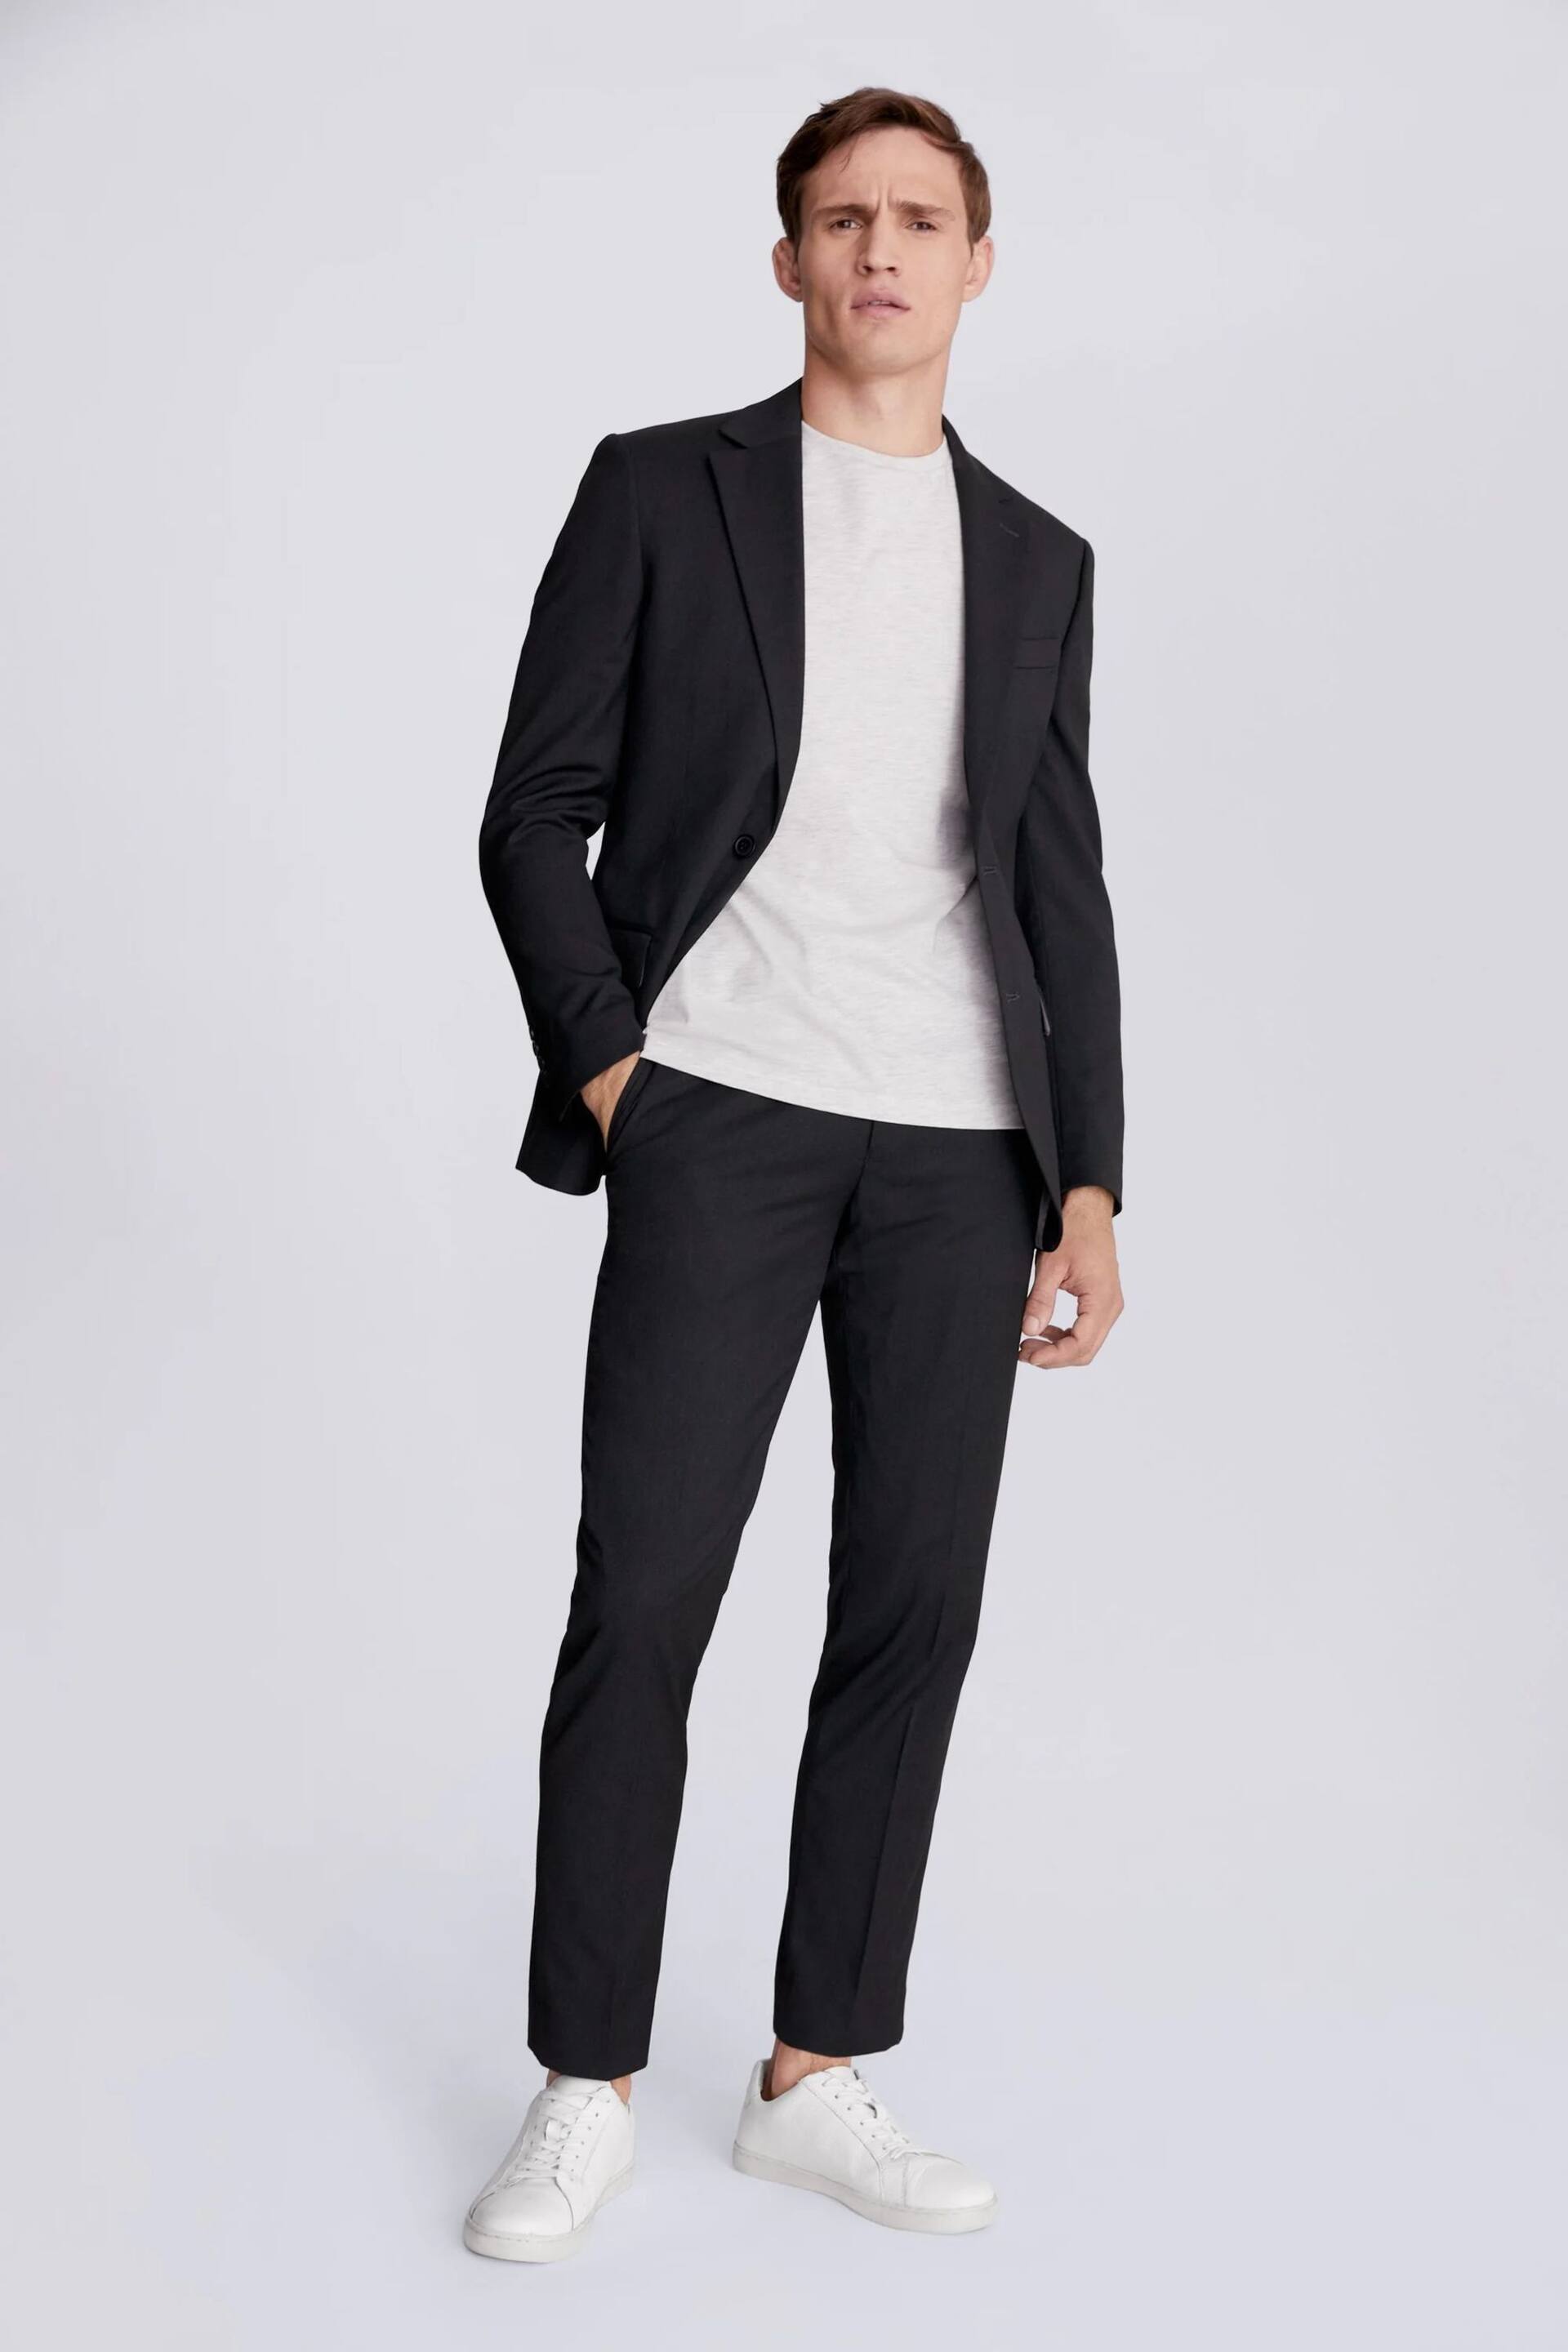 MOSS Charcoal Grey Tailored Stretch Suit: Jacket - Image 5 of 8